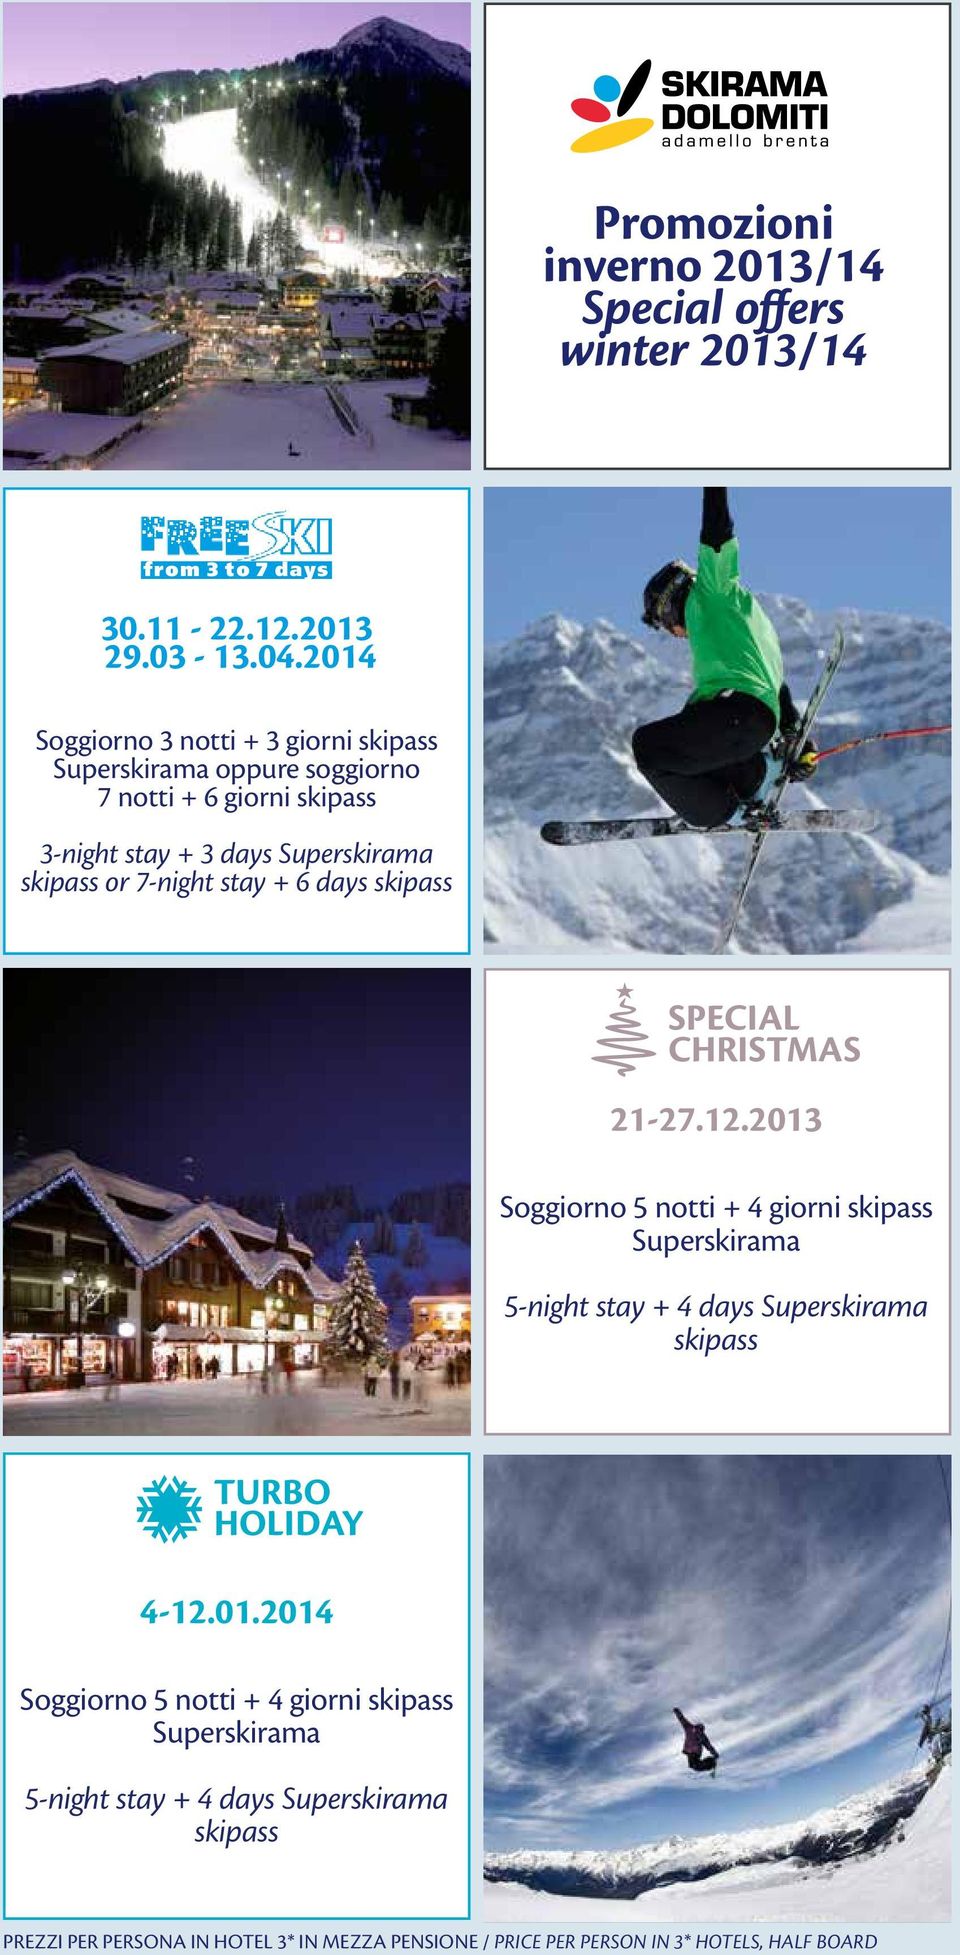 stay + 6 days skipass SPECIAL CHRISTMAS 21-27.12.